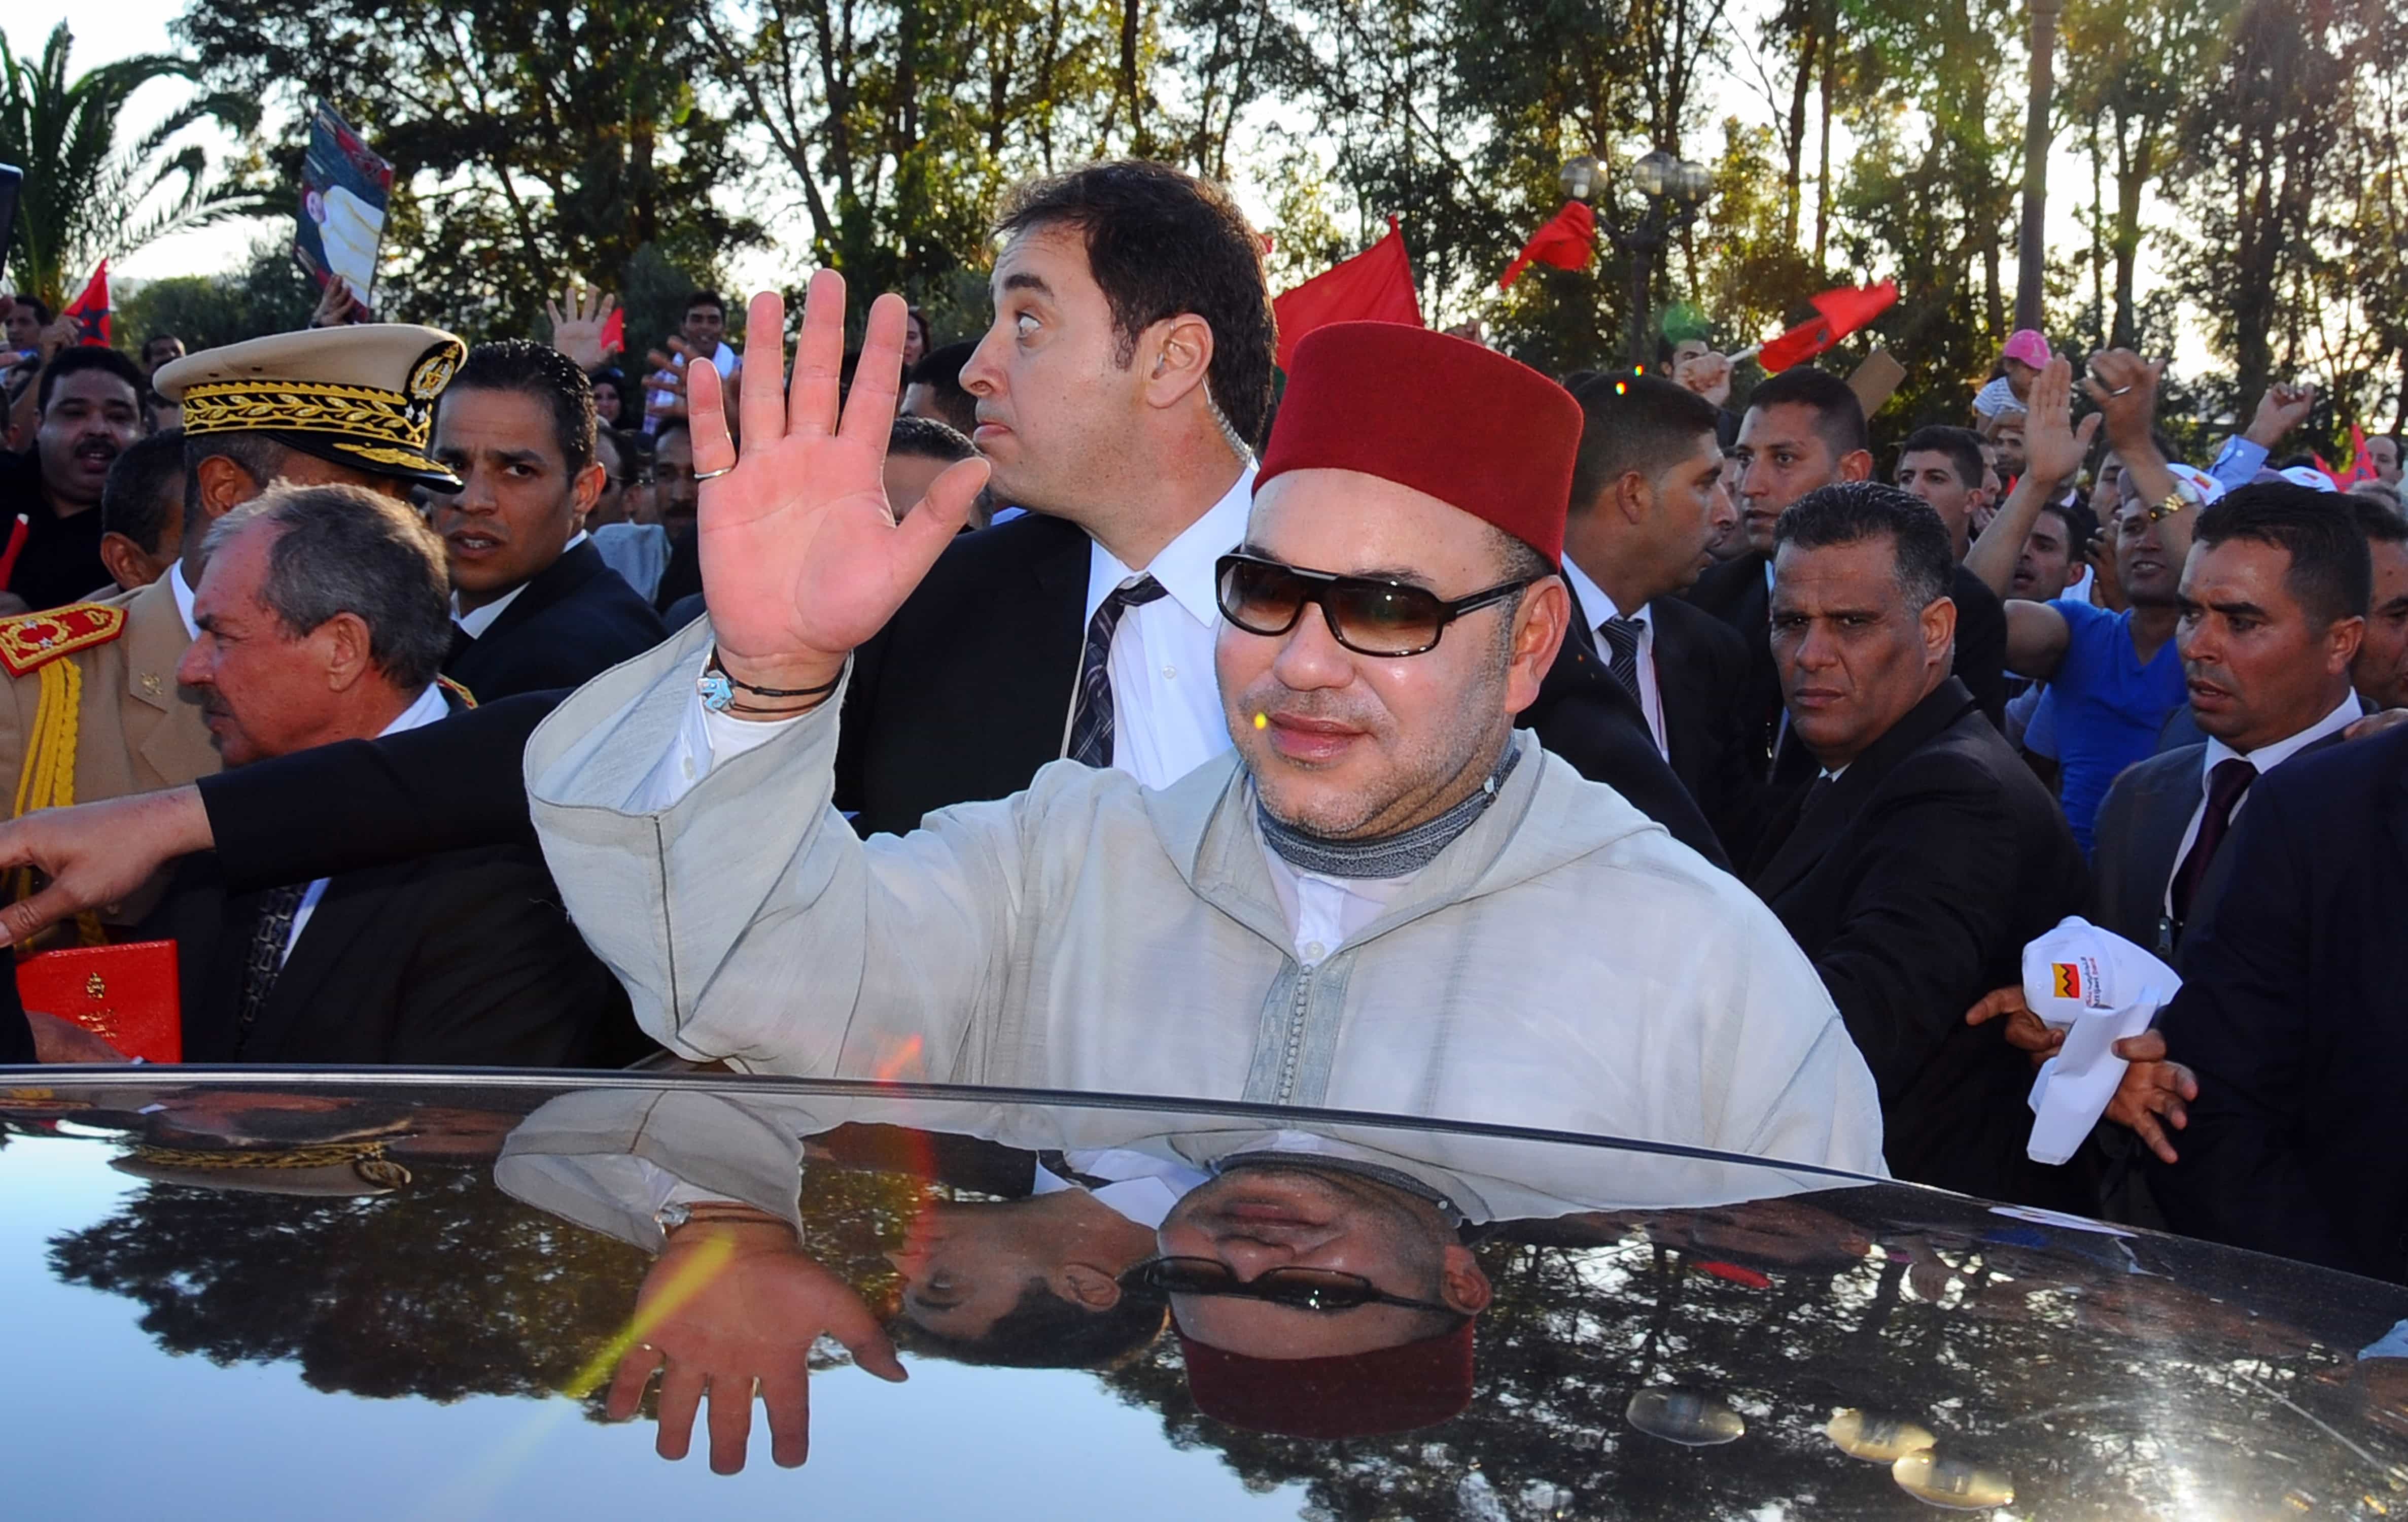 Morocco's King Mohammed VI waves, upon his arrival at Tunis airport, Friday May 30, 2014, AP Photo/Hassene Dridi